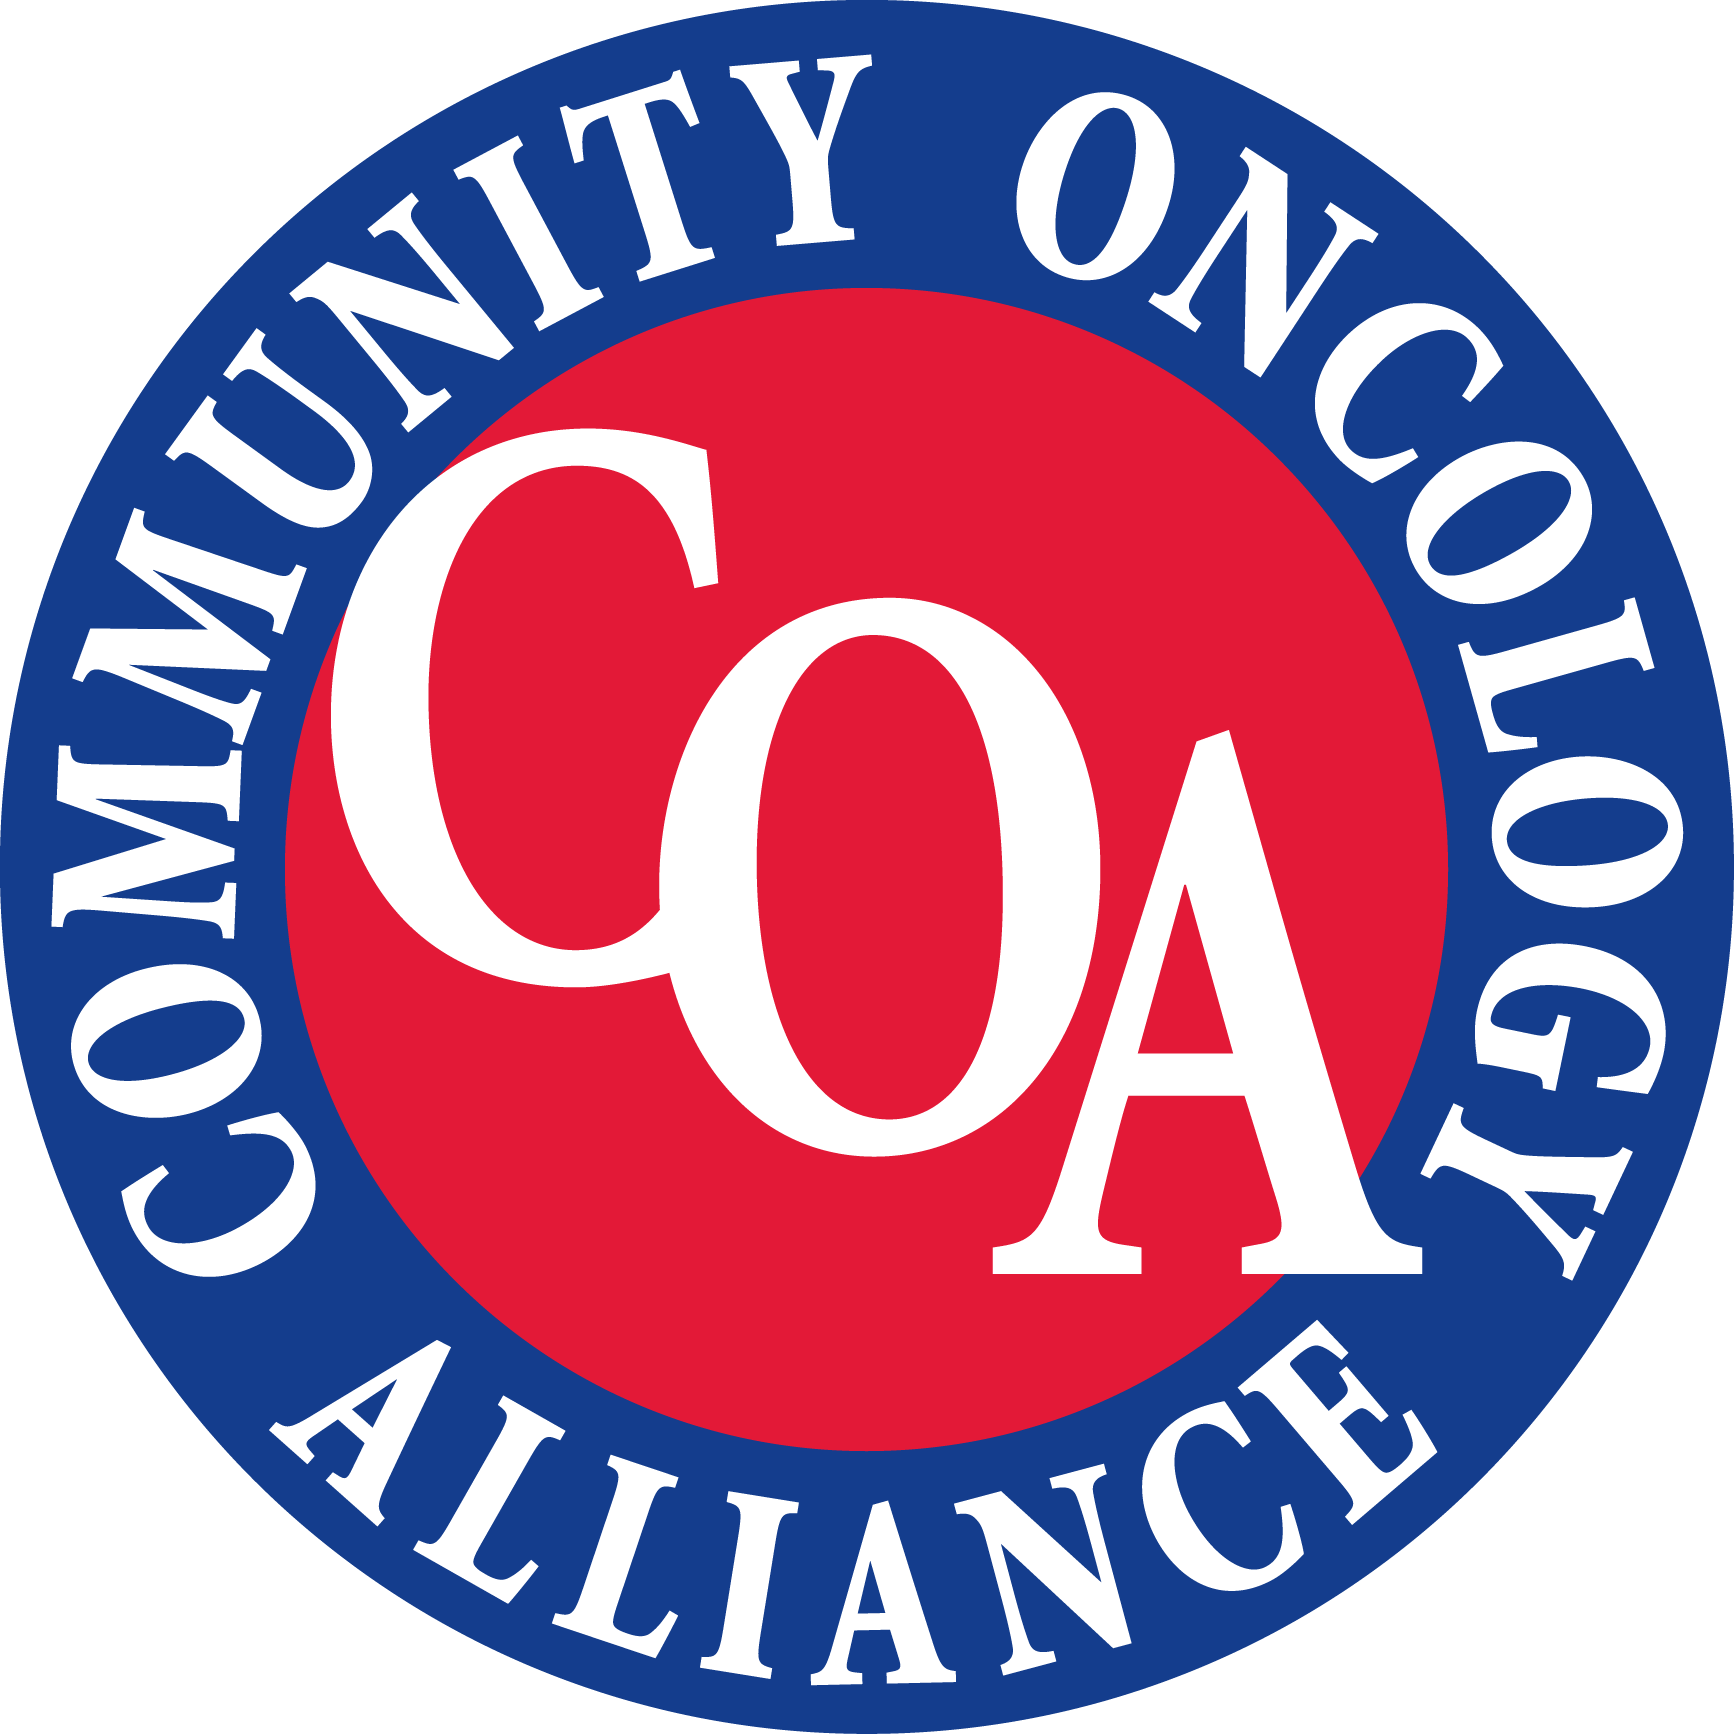 Community Oncology Alliance